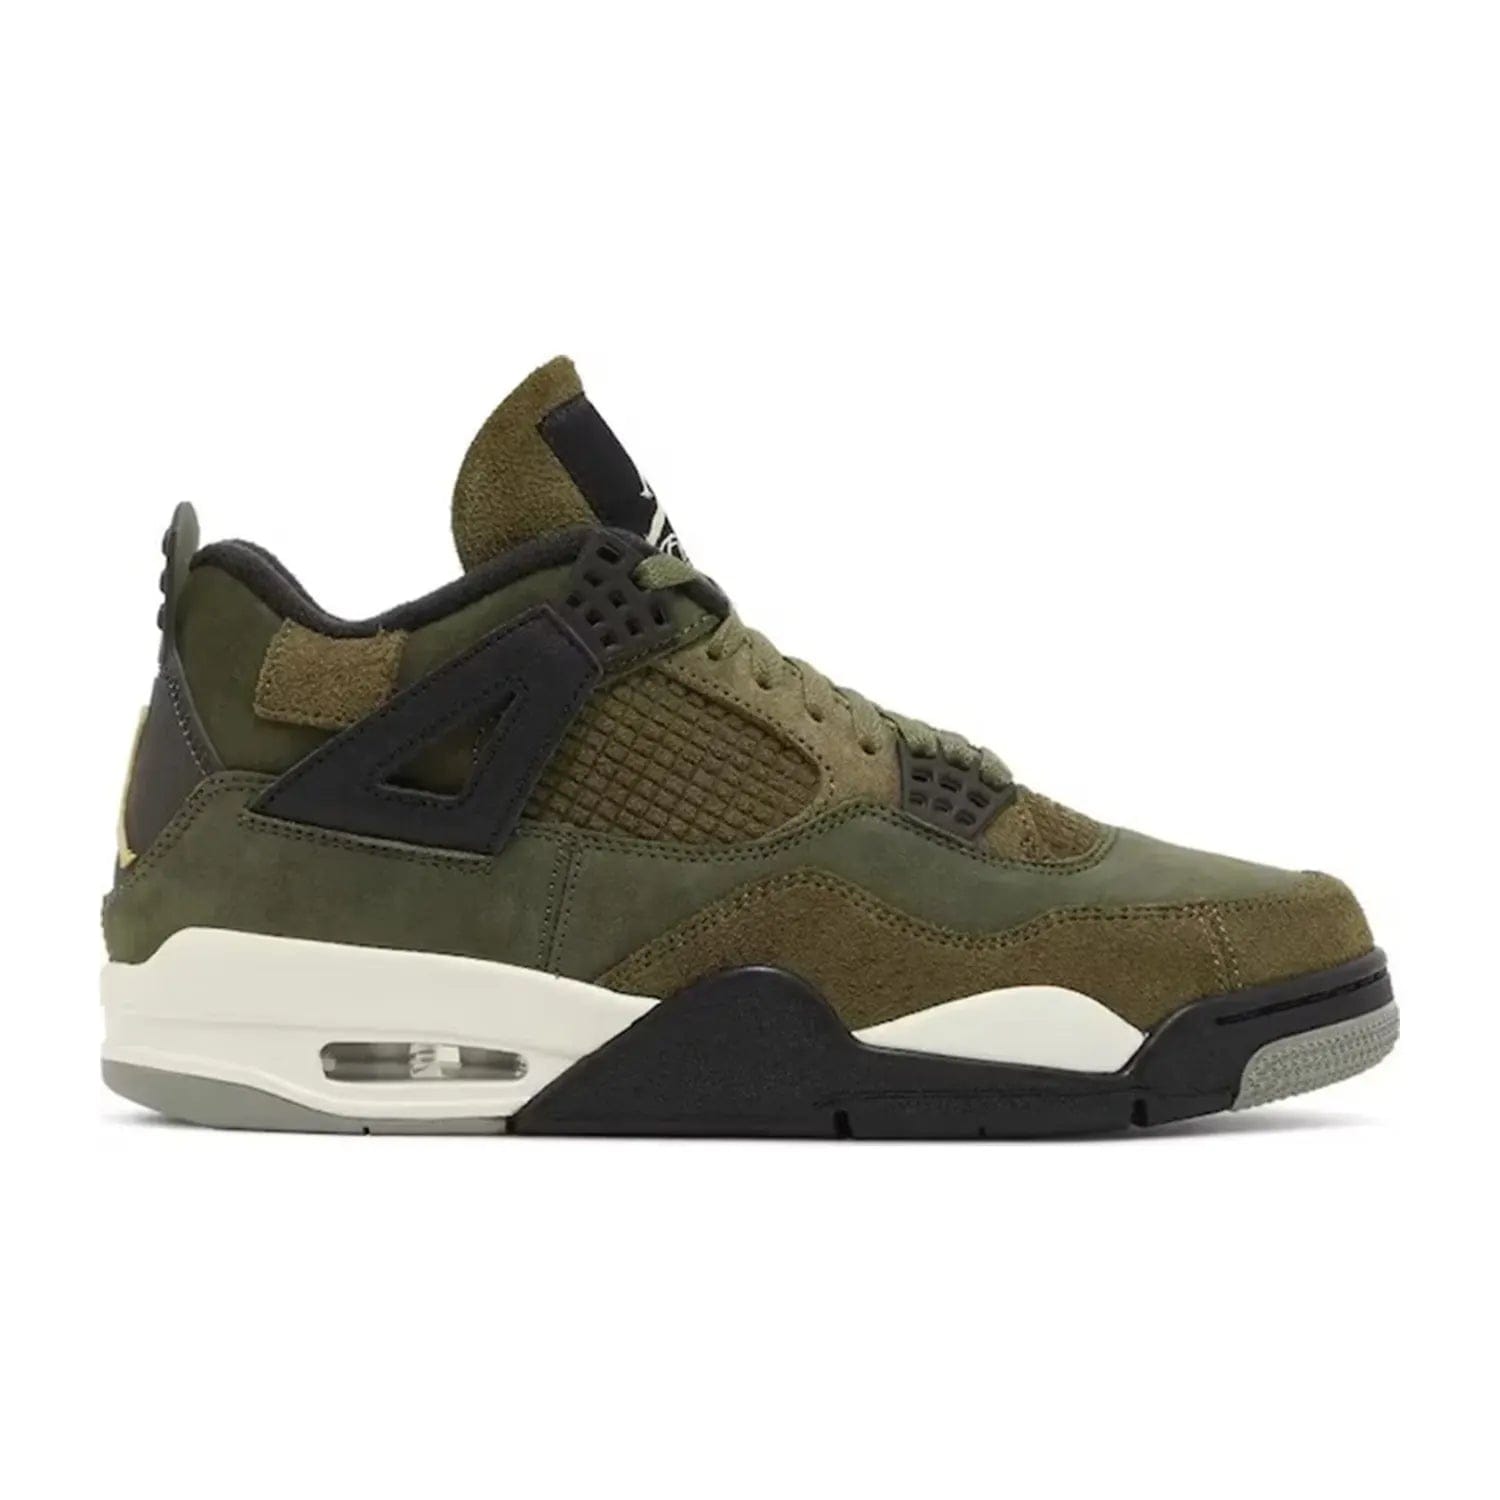 Jordan 4 Retro SE Craft Medium Olive (PS) - Image 1 - Only at www.BallersClubKickz.com - Refresh your style with the Jordan 4 Retro SE Craft Medium Olive (PS)! This eye-catching shoe offers an stylish Medium Olive/Pale Vanilla/Khaki/Black/Sail colorway with intricate details for a unique look. Get the comfort of traditional Air Jordan cushioning with an enhanced design for extra comfort. Elevate your style with the Jordan 4 Retro SE Craft Medium Olive (PS)!